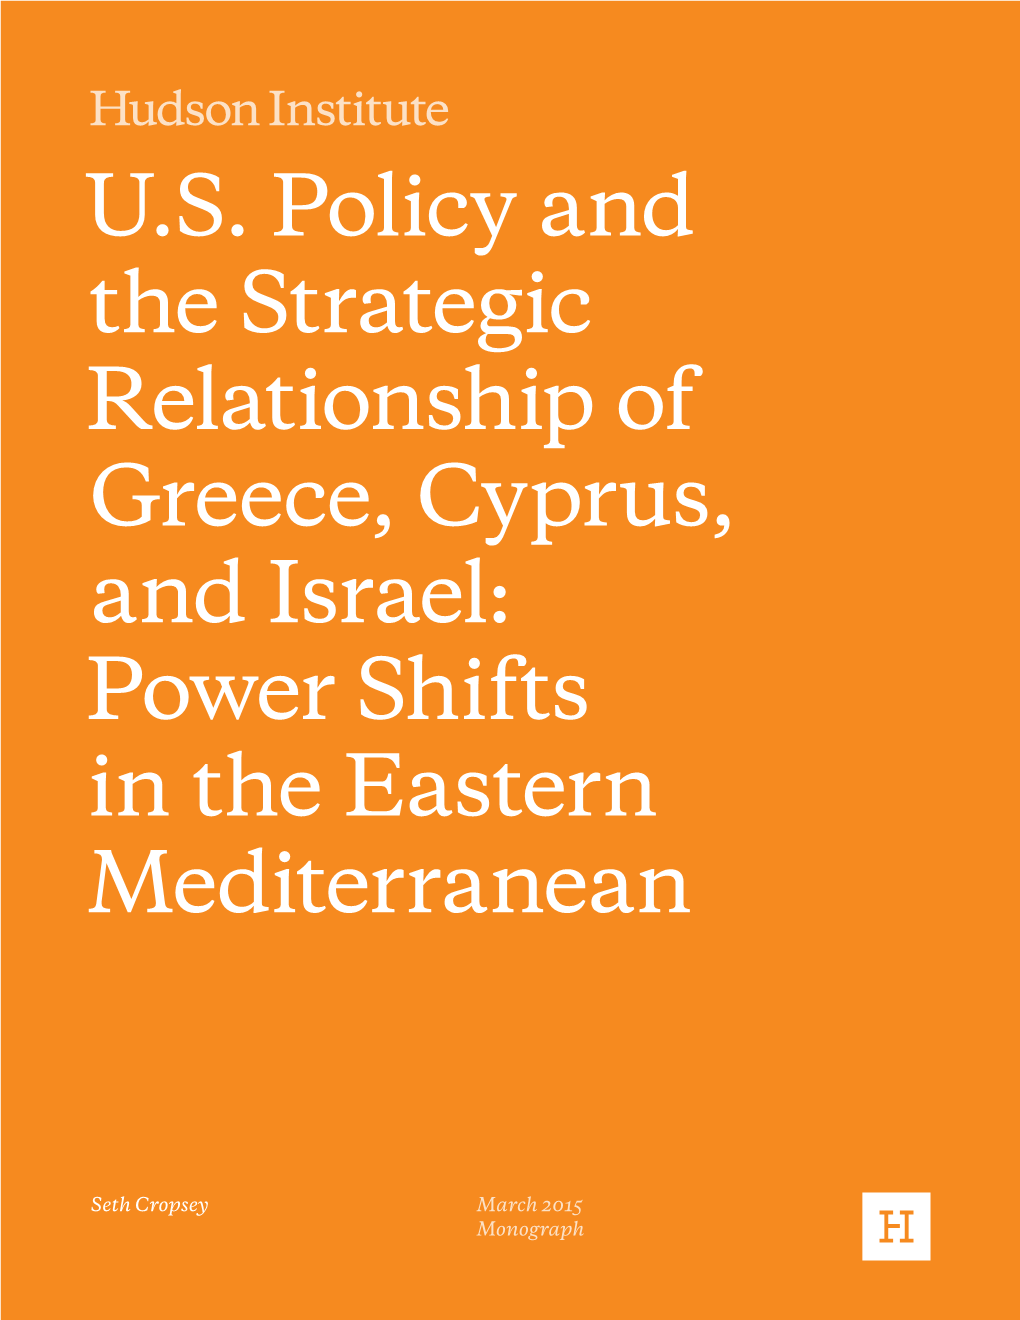 U.S. Policy and the Strategic Relationship of Greece, Cyprus, and Israel: Power Shifts in the Eastern Mediterranean